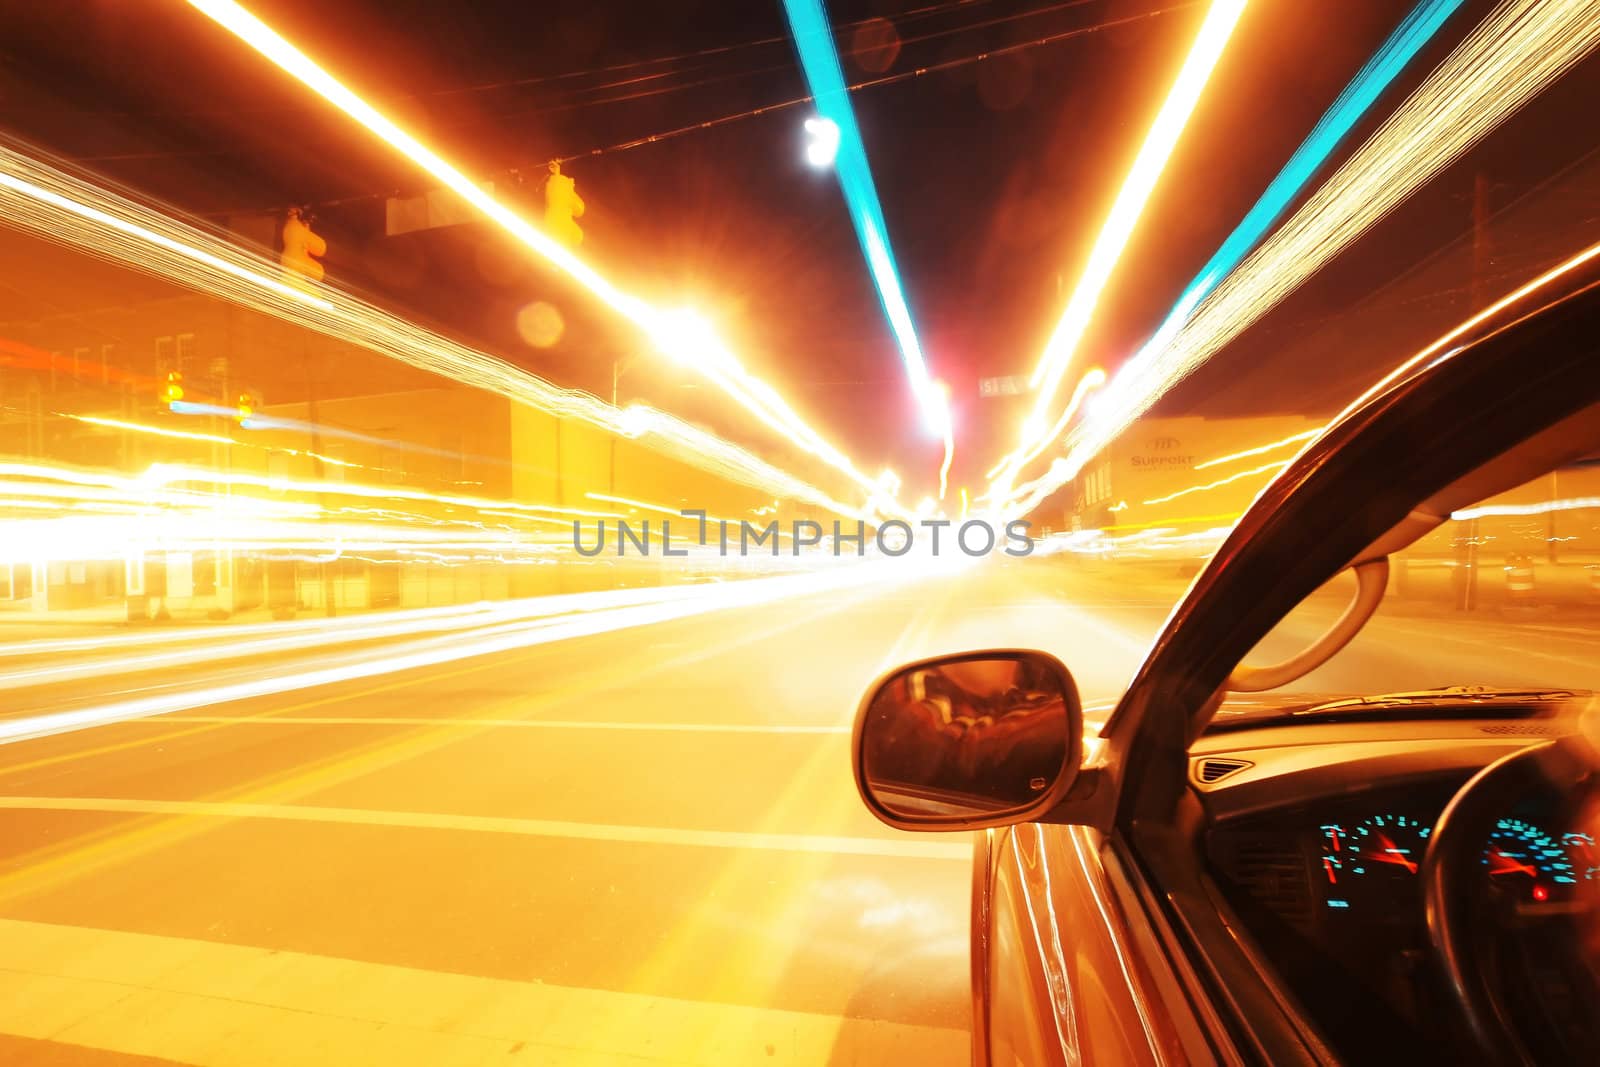 View from a moving vehicle gives feeling of a speed of light as timetravel